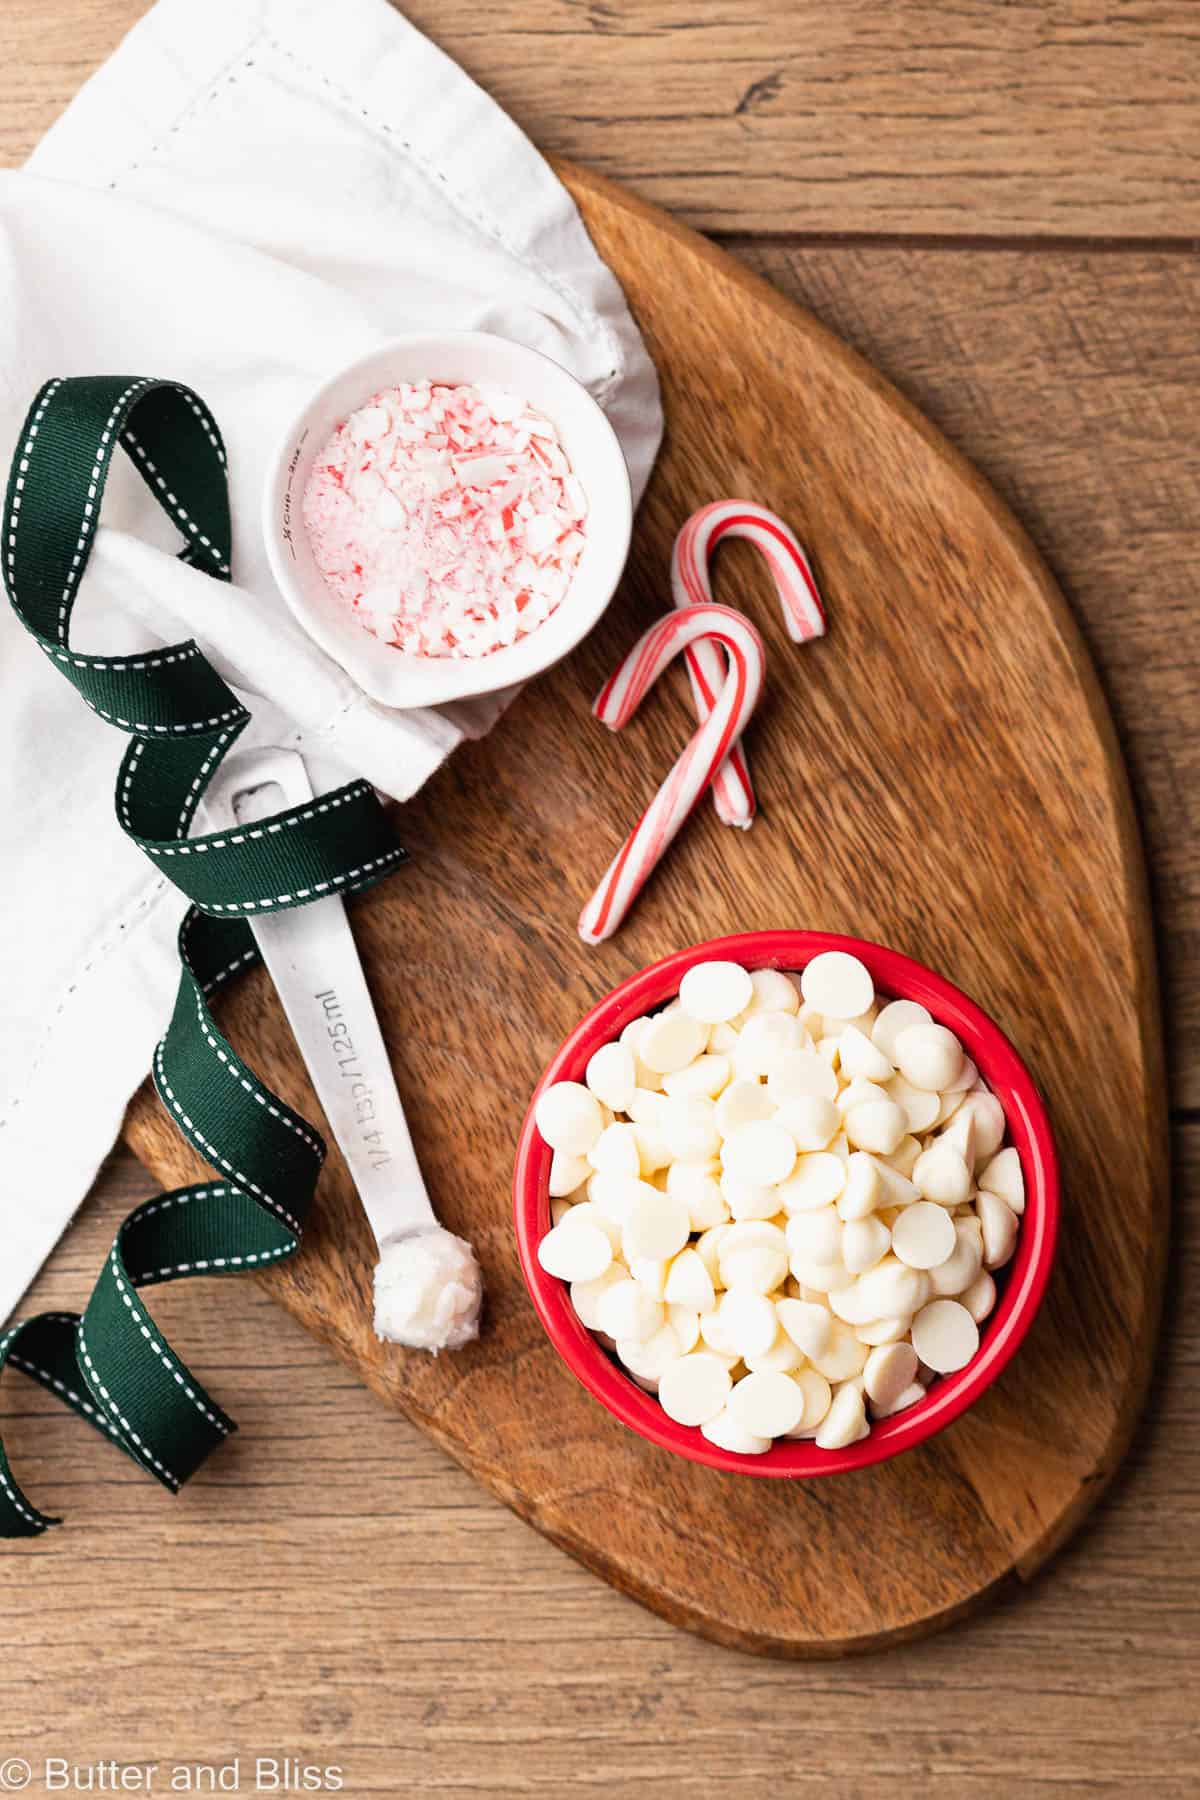 White chocolate chips and peppermint candies in small decorative bowls arranged on a wood table.